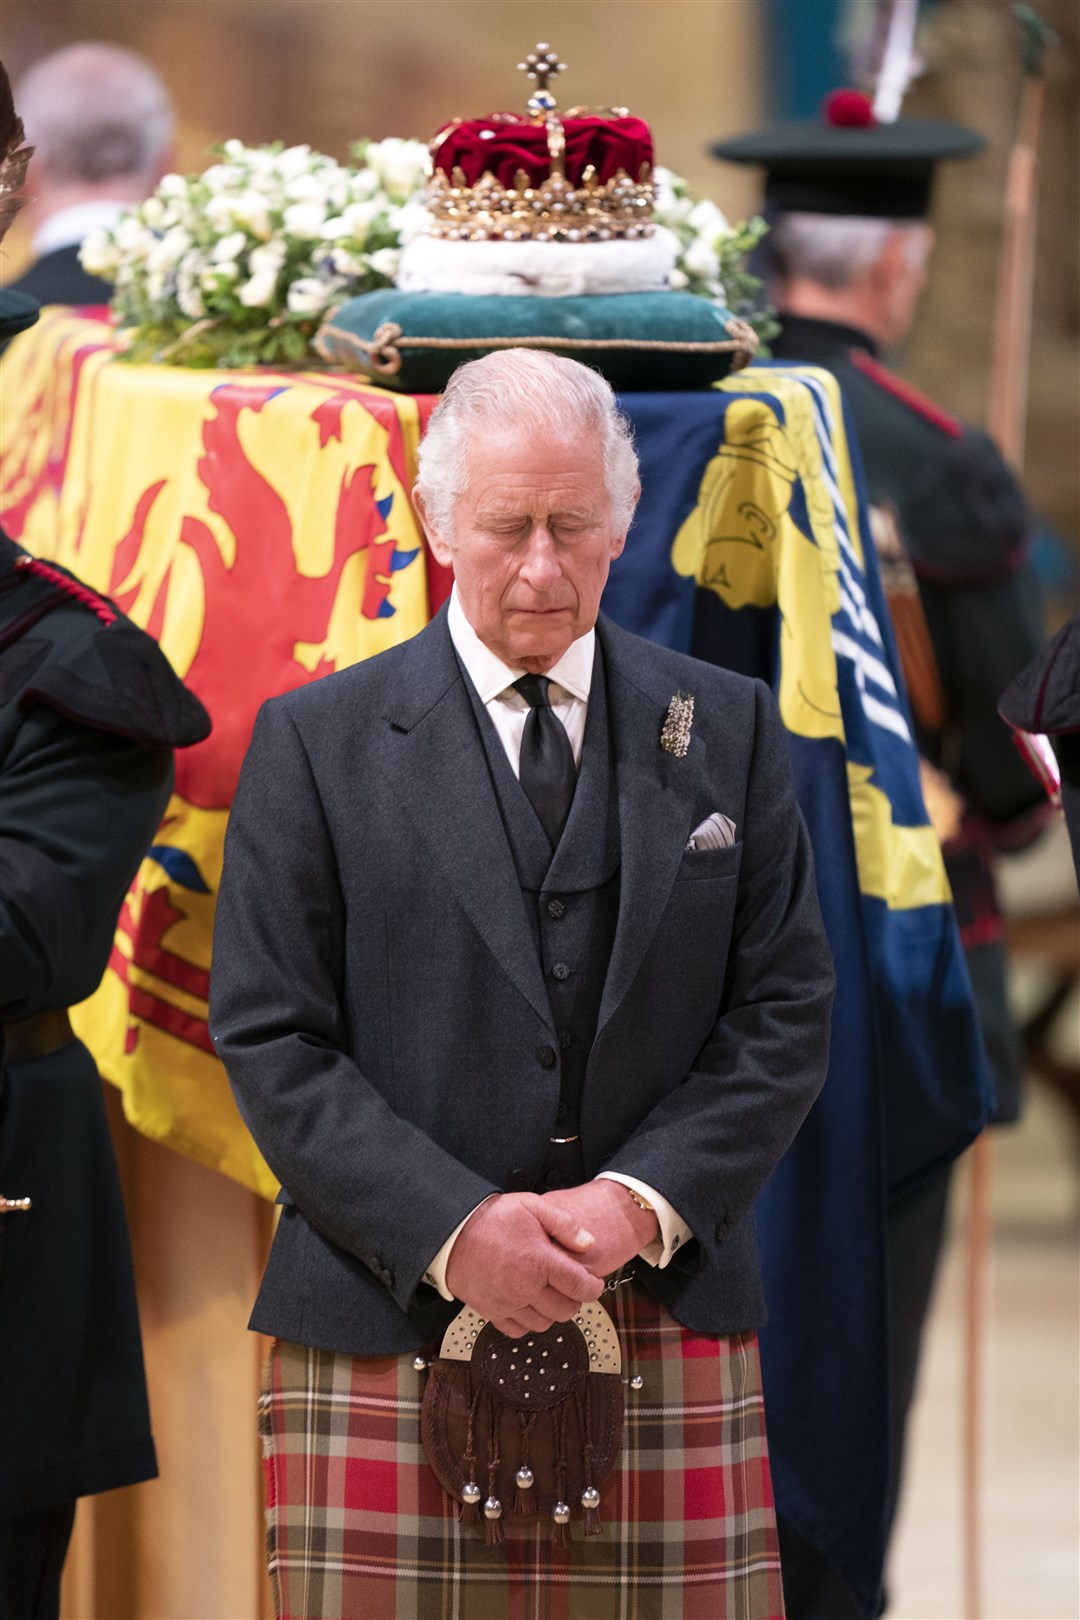 King Charles III and other members of the royal family hold a vigil at St Giles’ Cathedral (Jane Barlow/PA)